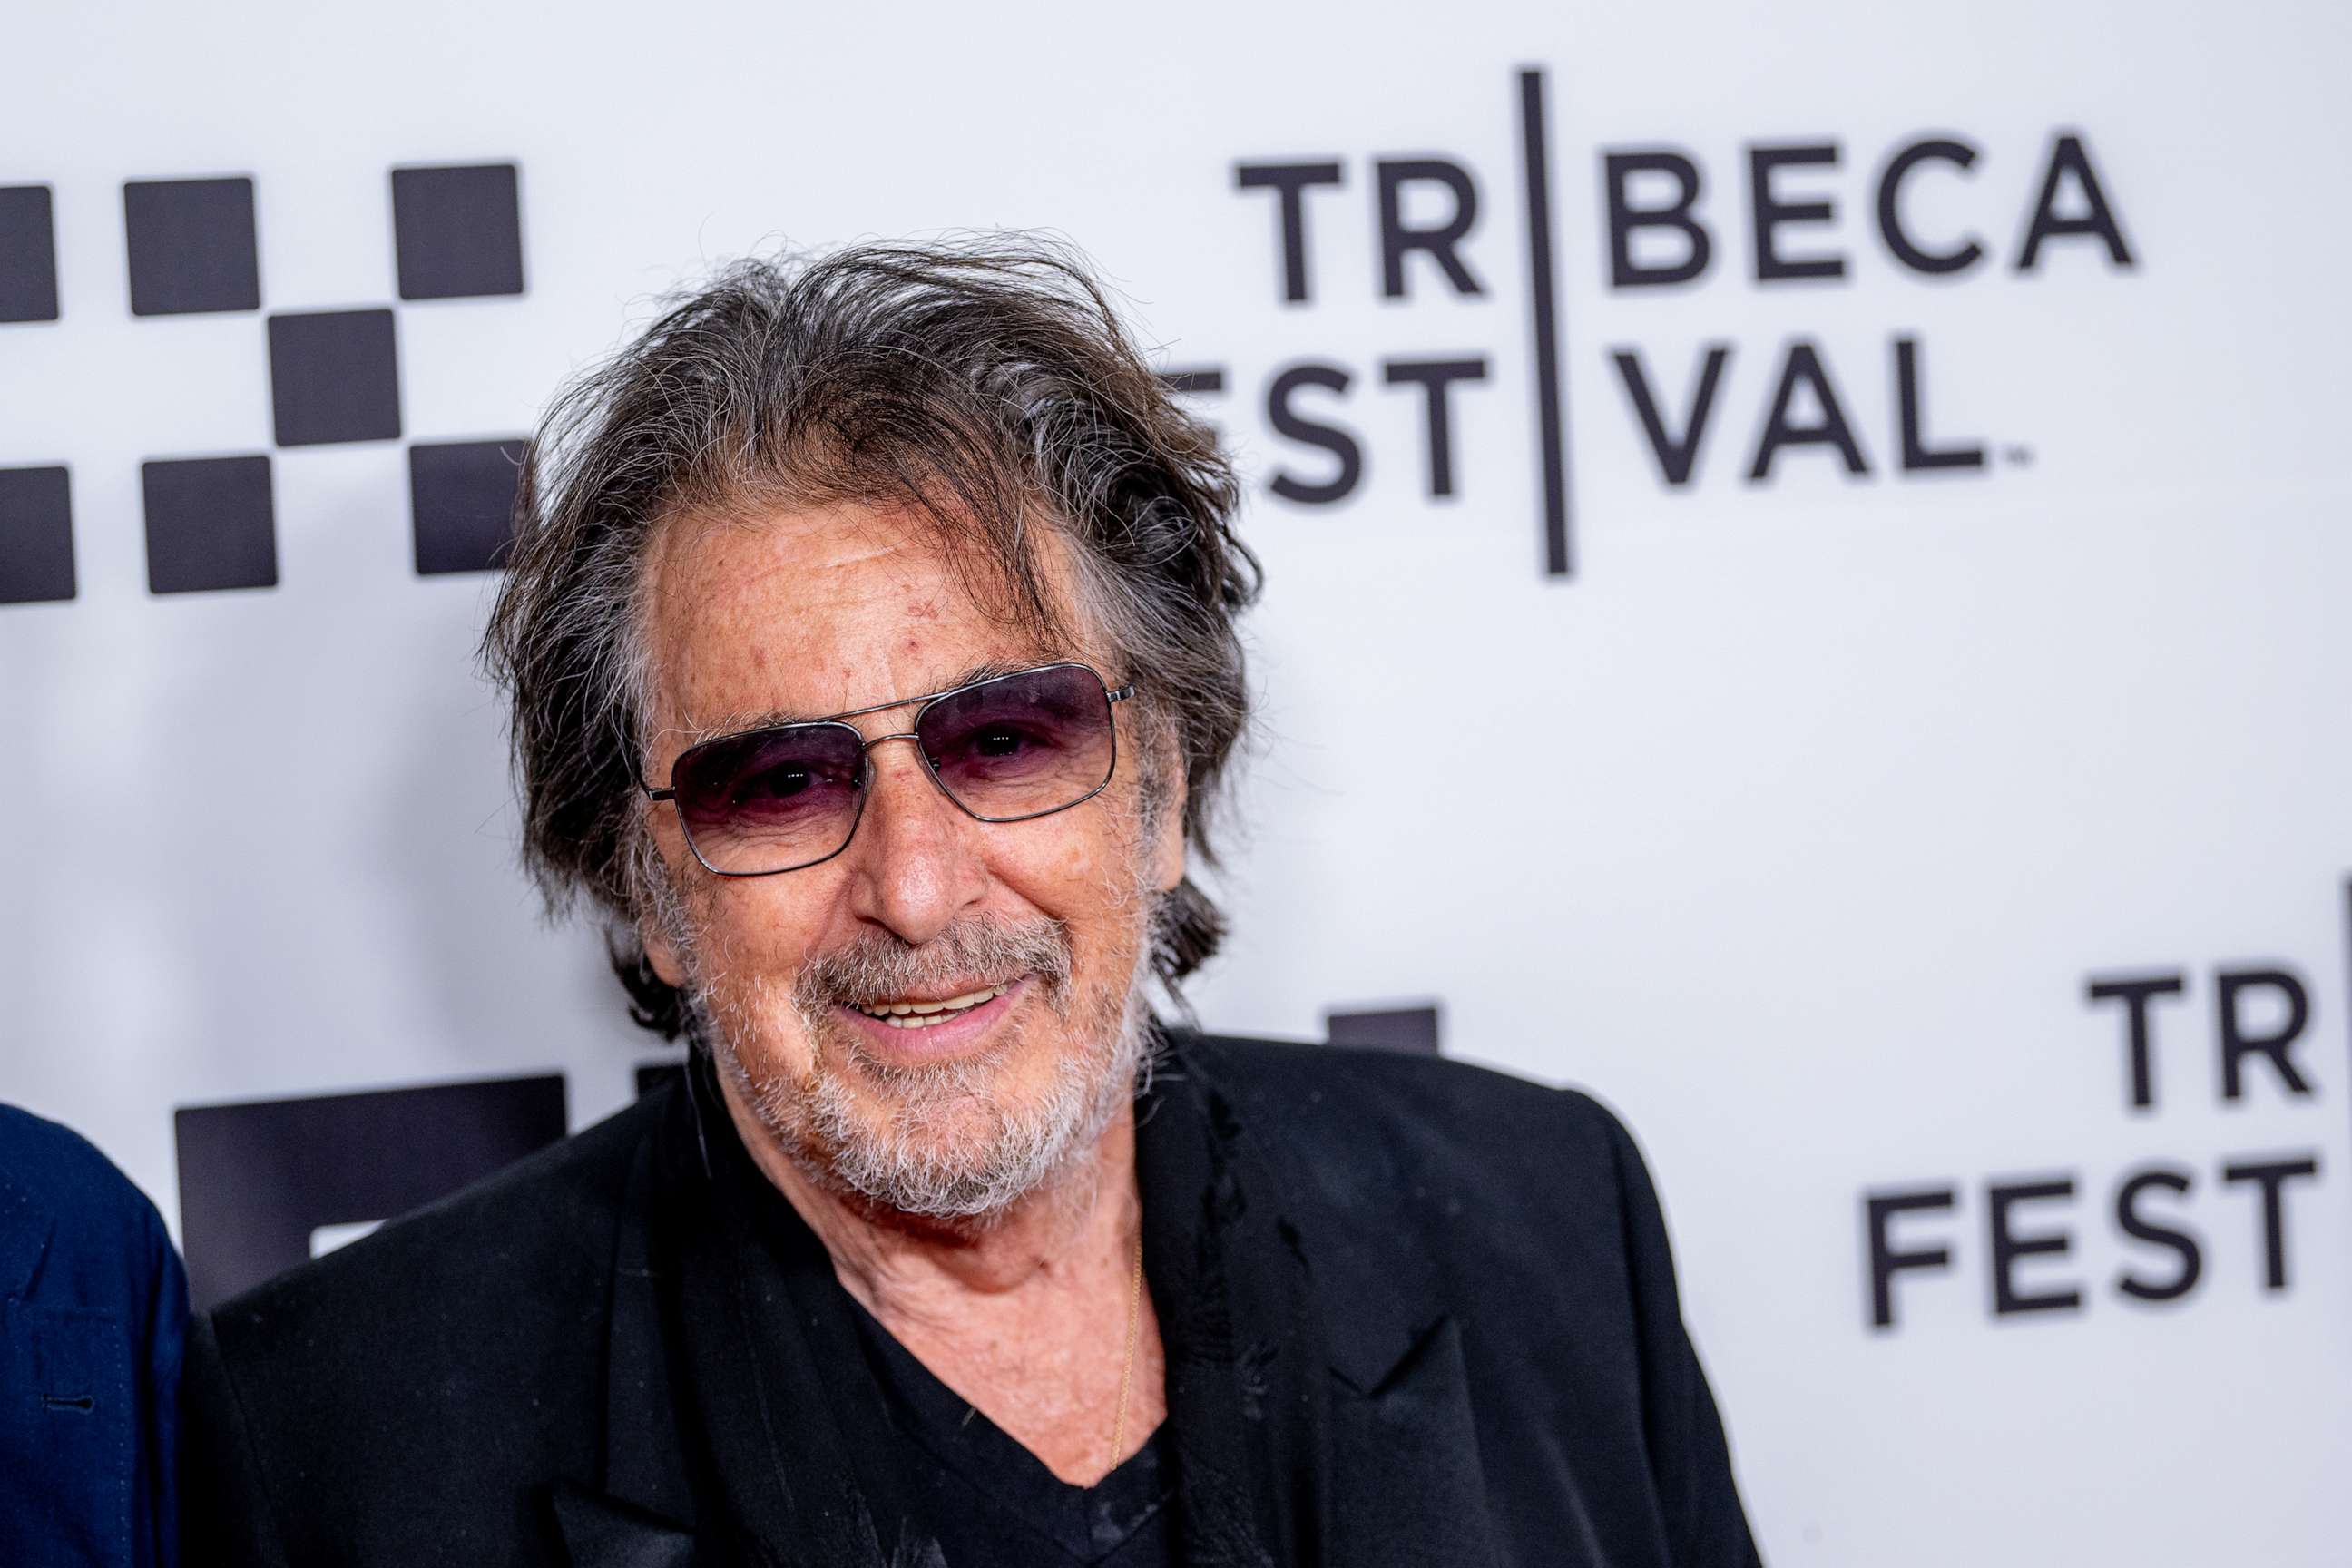 PHOTO: Al Pacino during the 2022 Tribeca Festival at United Palace Theater on June 16, 2022 in New York City.